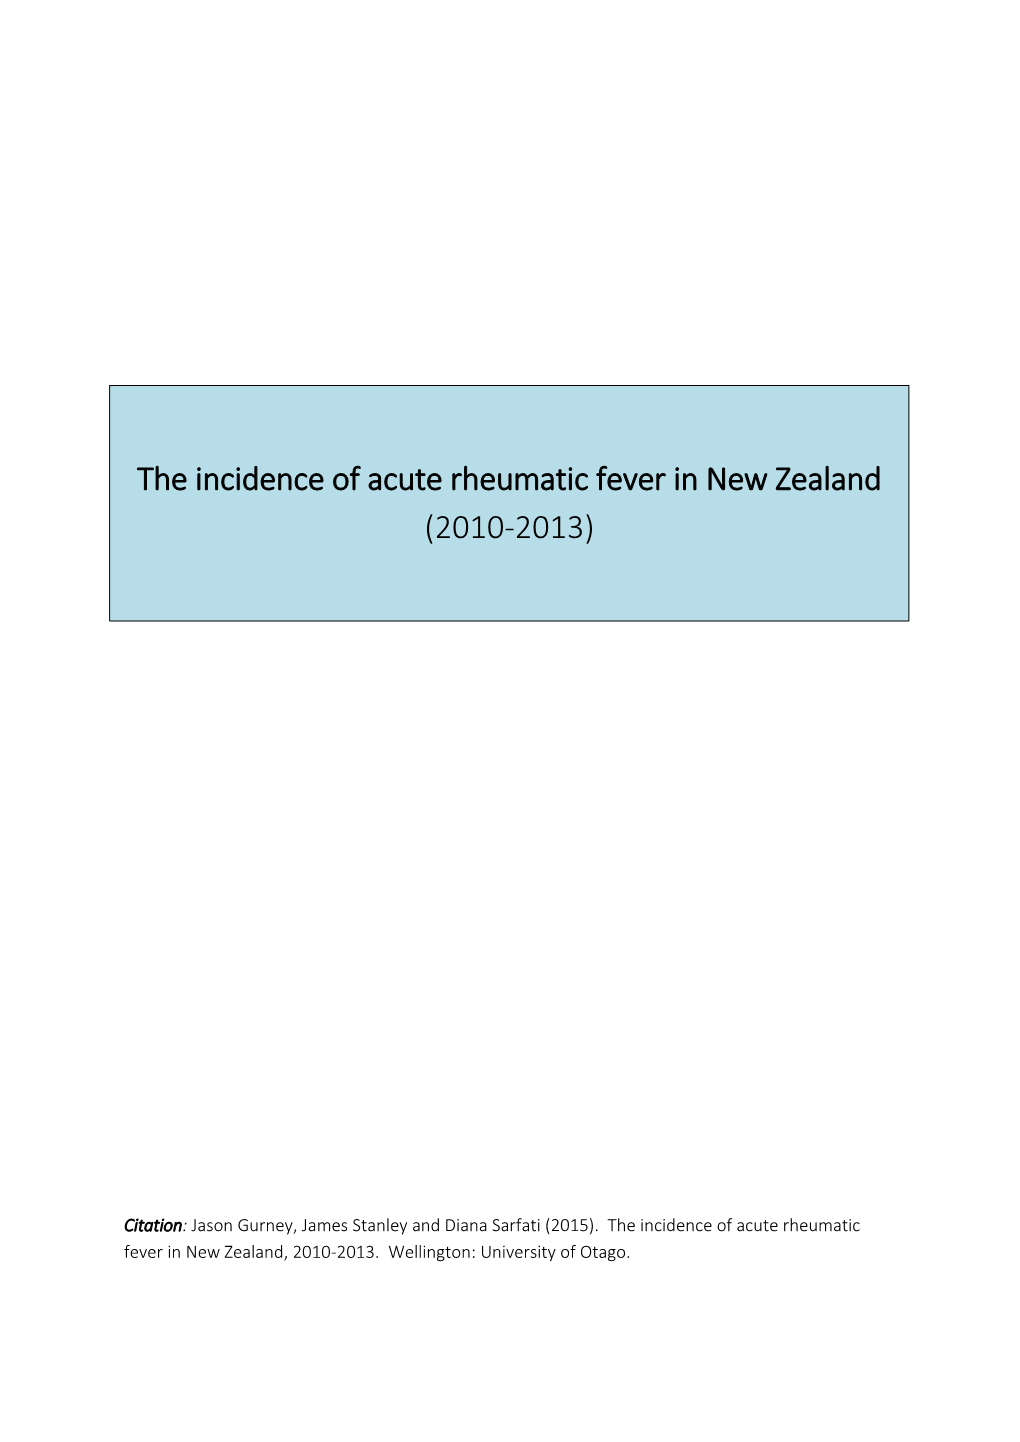 The Incidence of Acute Rheumatic Fever in New Zealand (2010-2013)